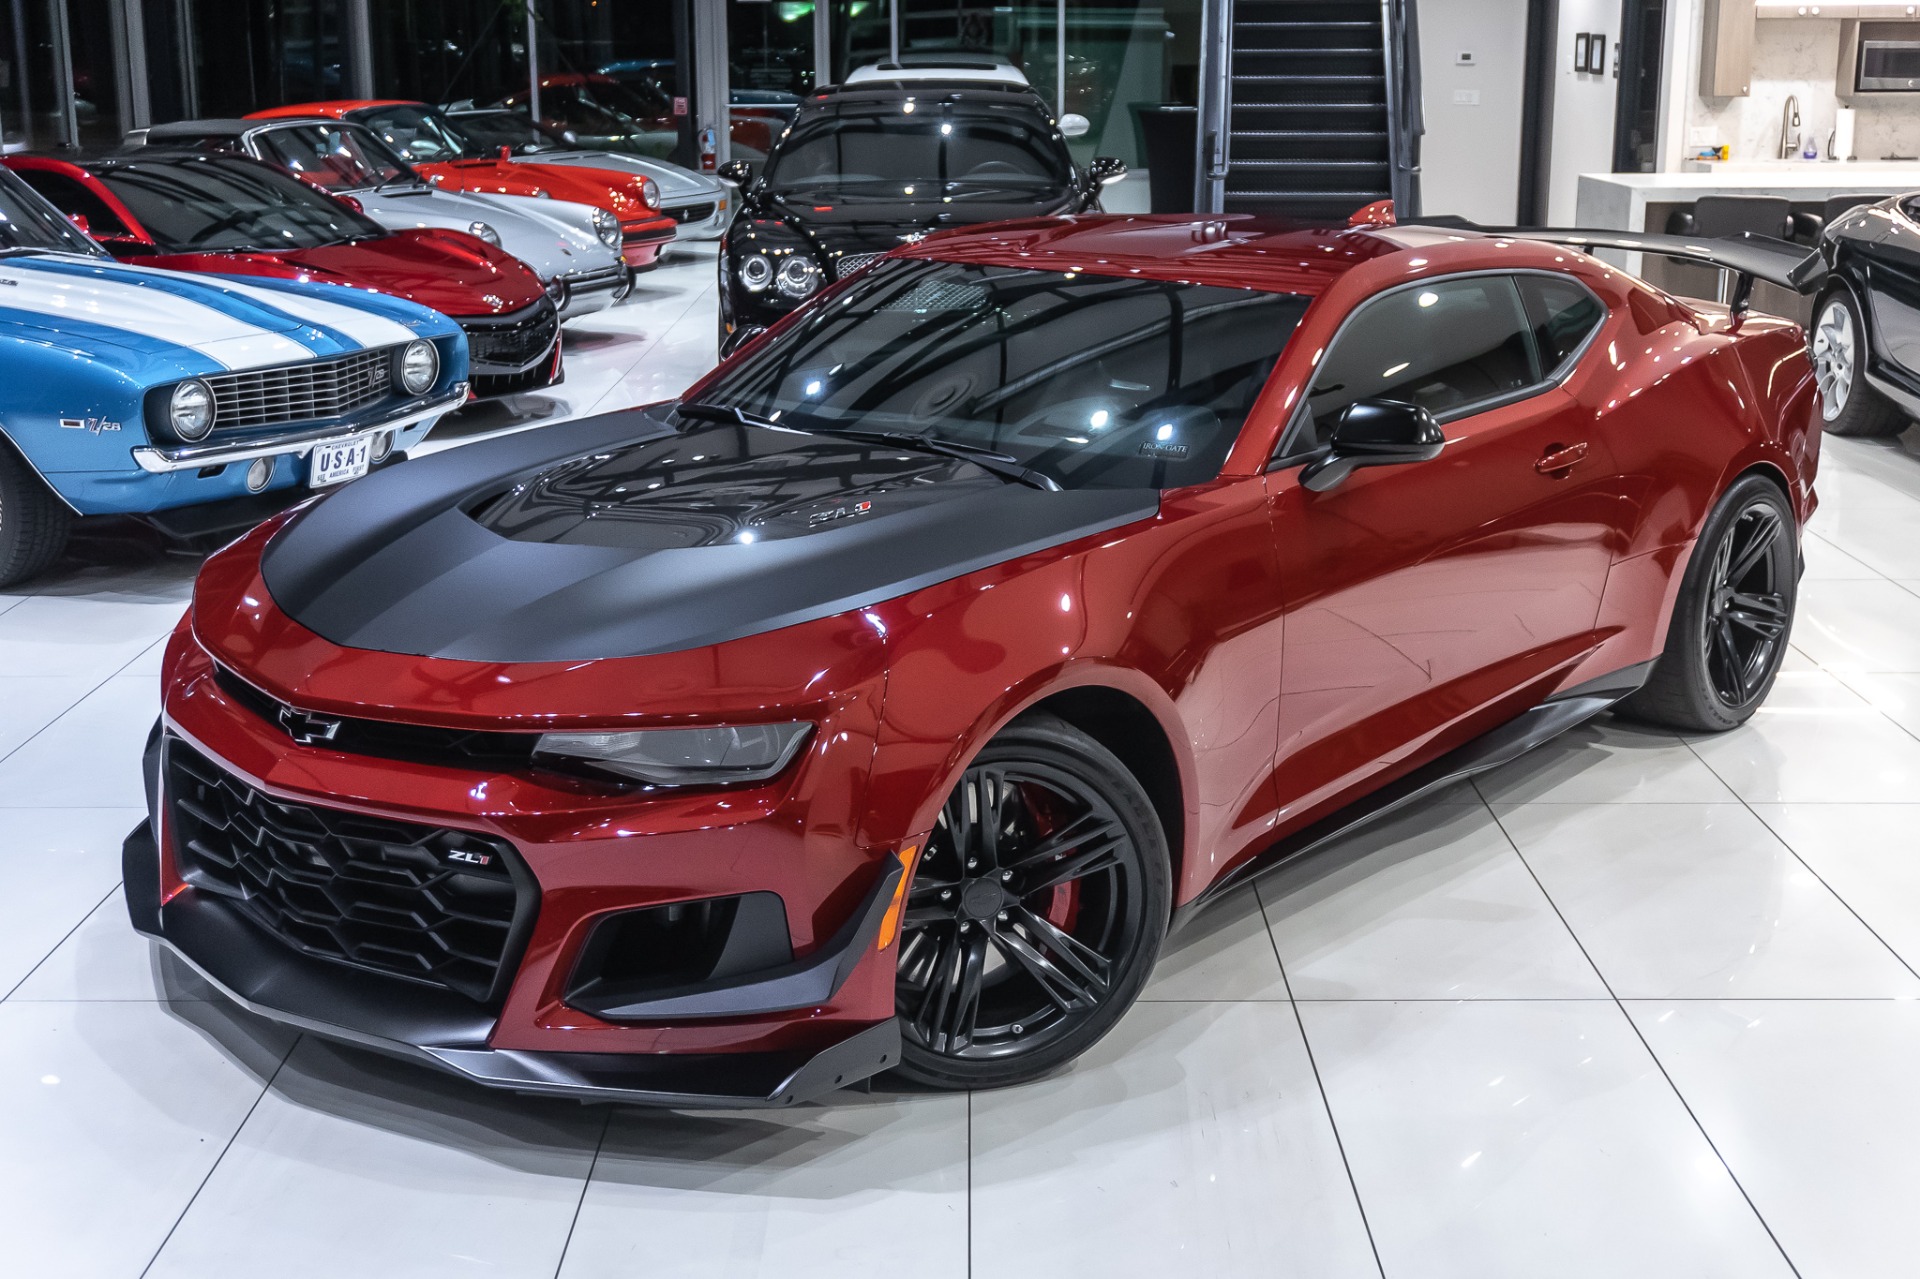 Used 2019 Chevrolet Camaro ZL1 1LE ONLY 161 MILES! For